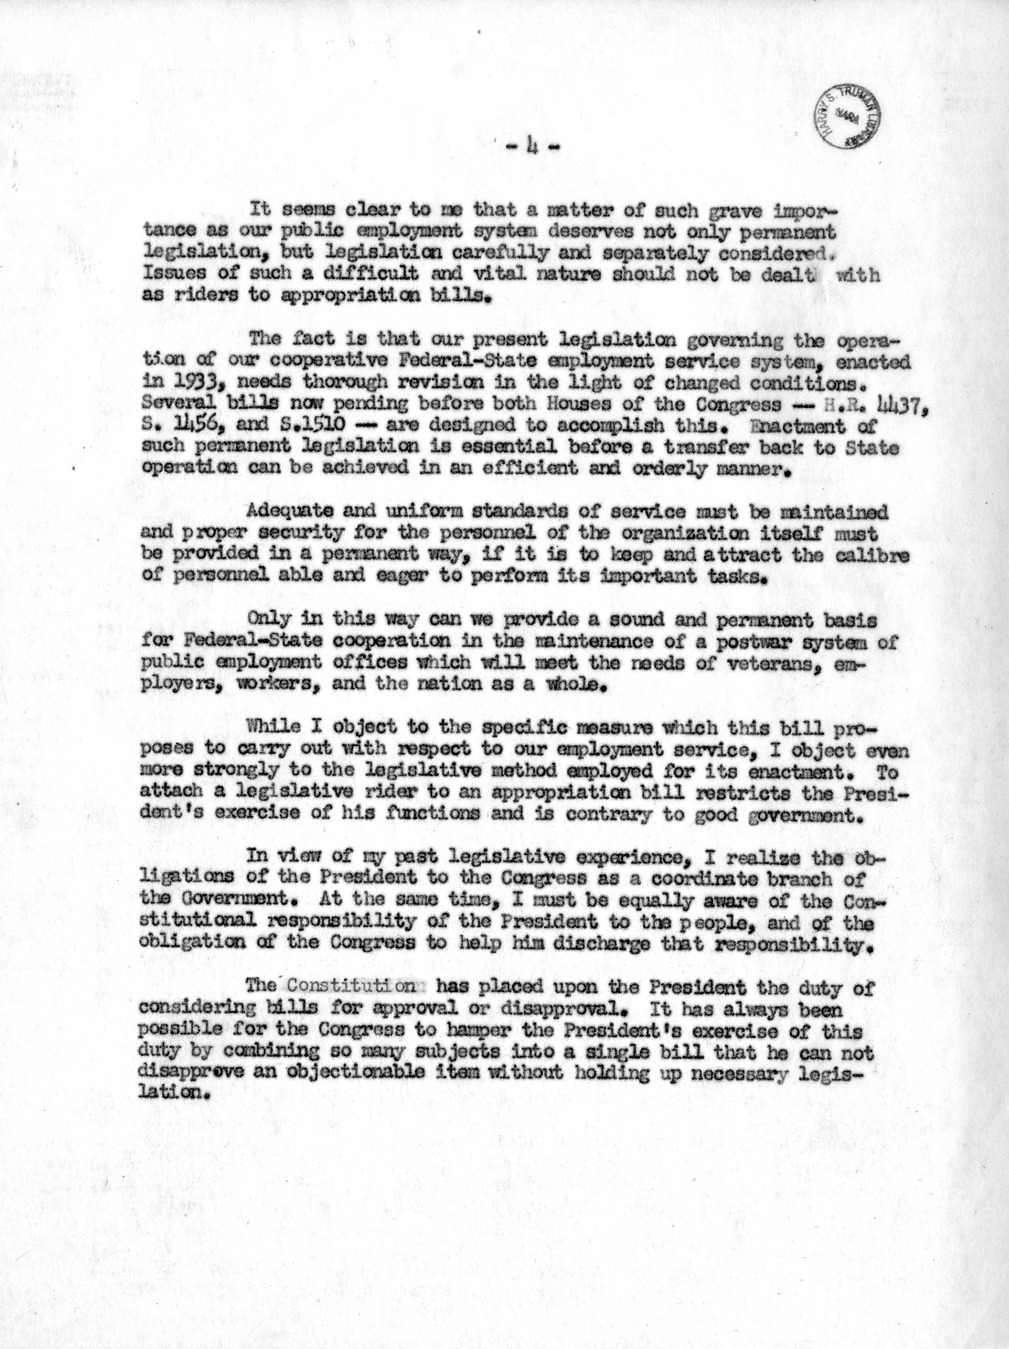 Memorandum from Harold D. Smith to M. C. Latta, H.R. 4407, Reducing Certain Appropriations and Contract Authorizations Available for the Fiscal Year 1946, with Attachments